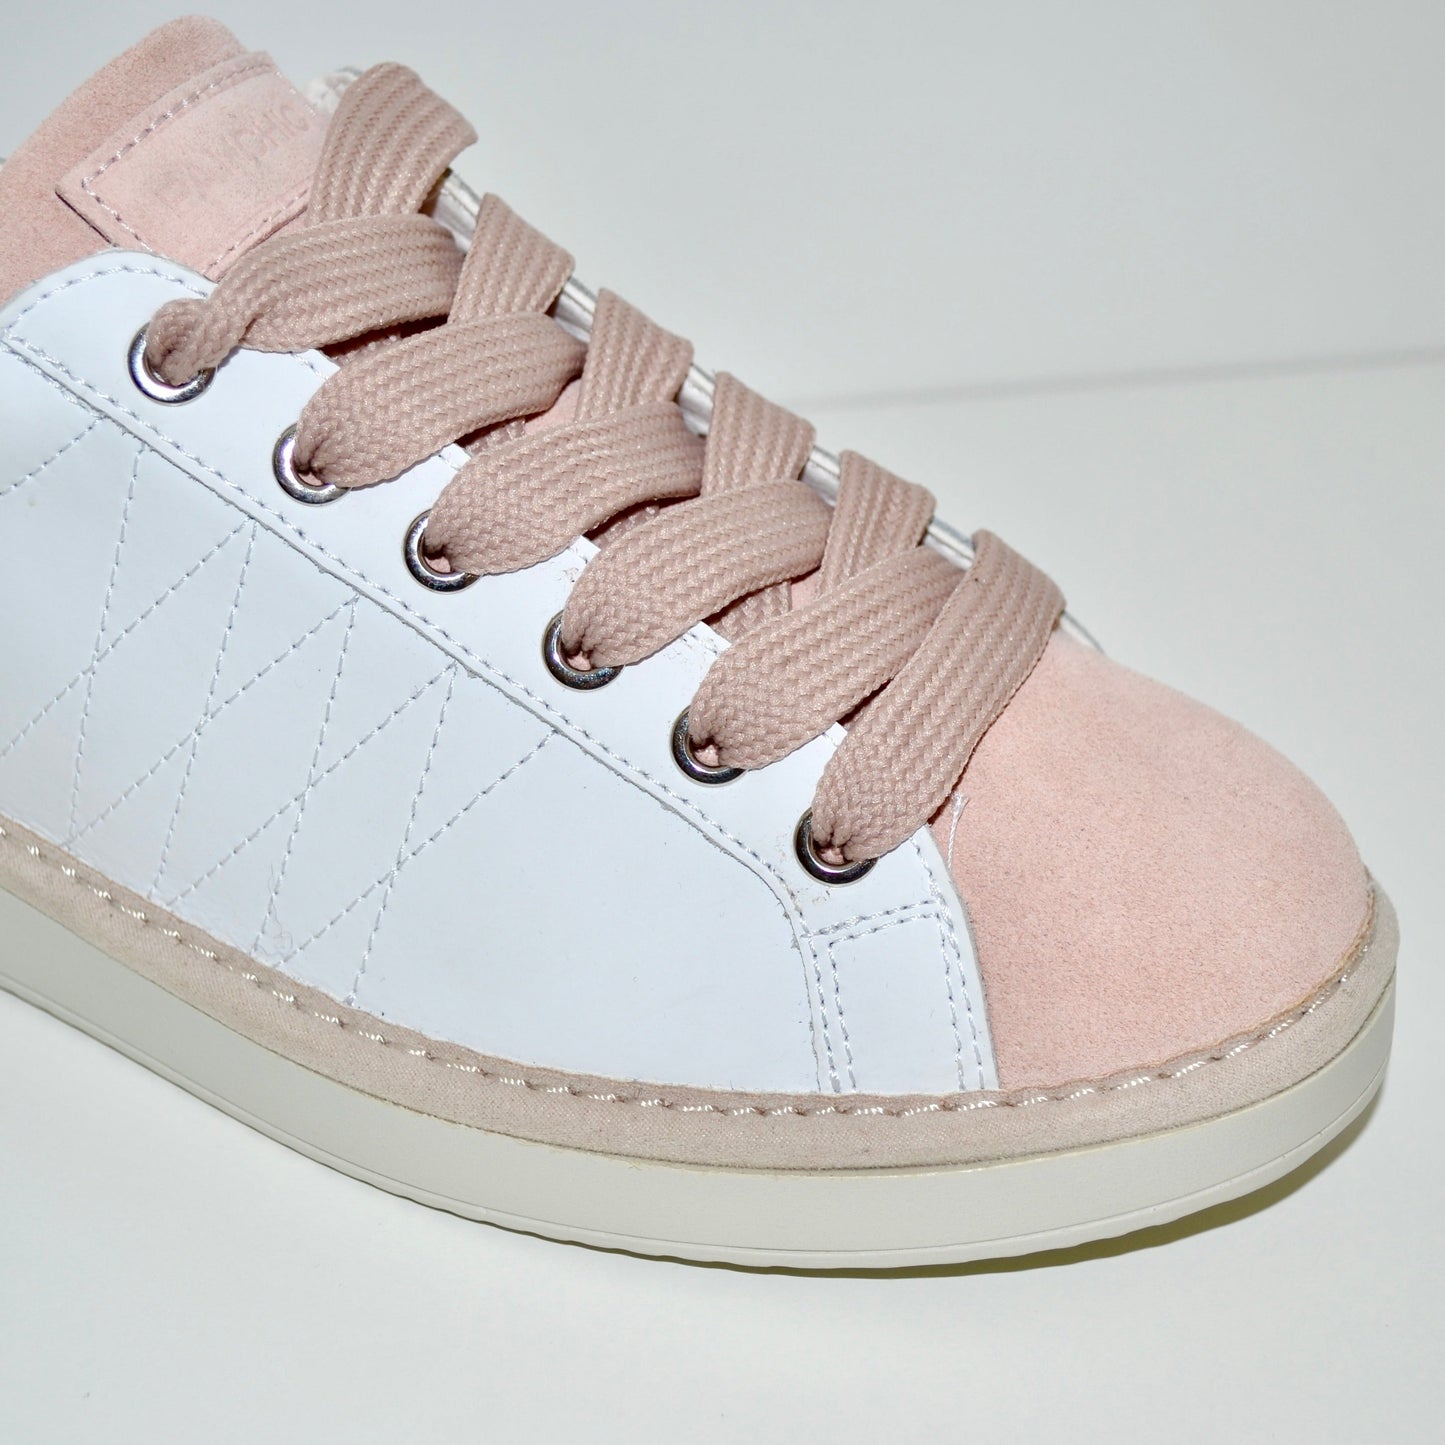 Sneakers Panchic woman white leather and pink suede